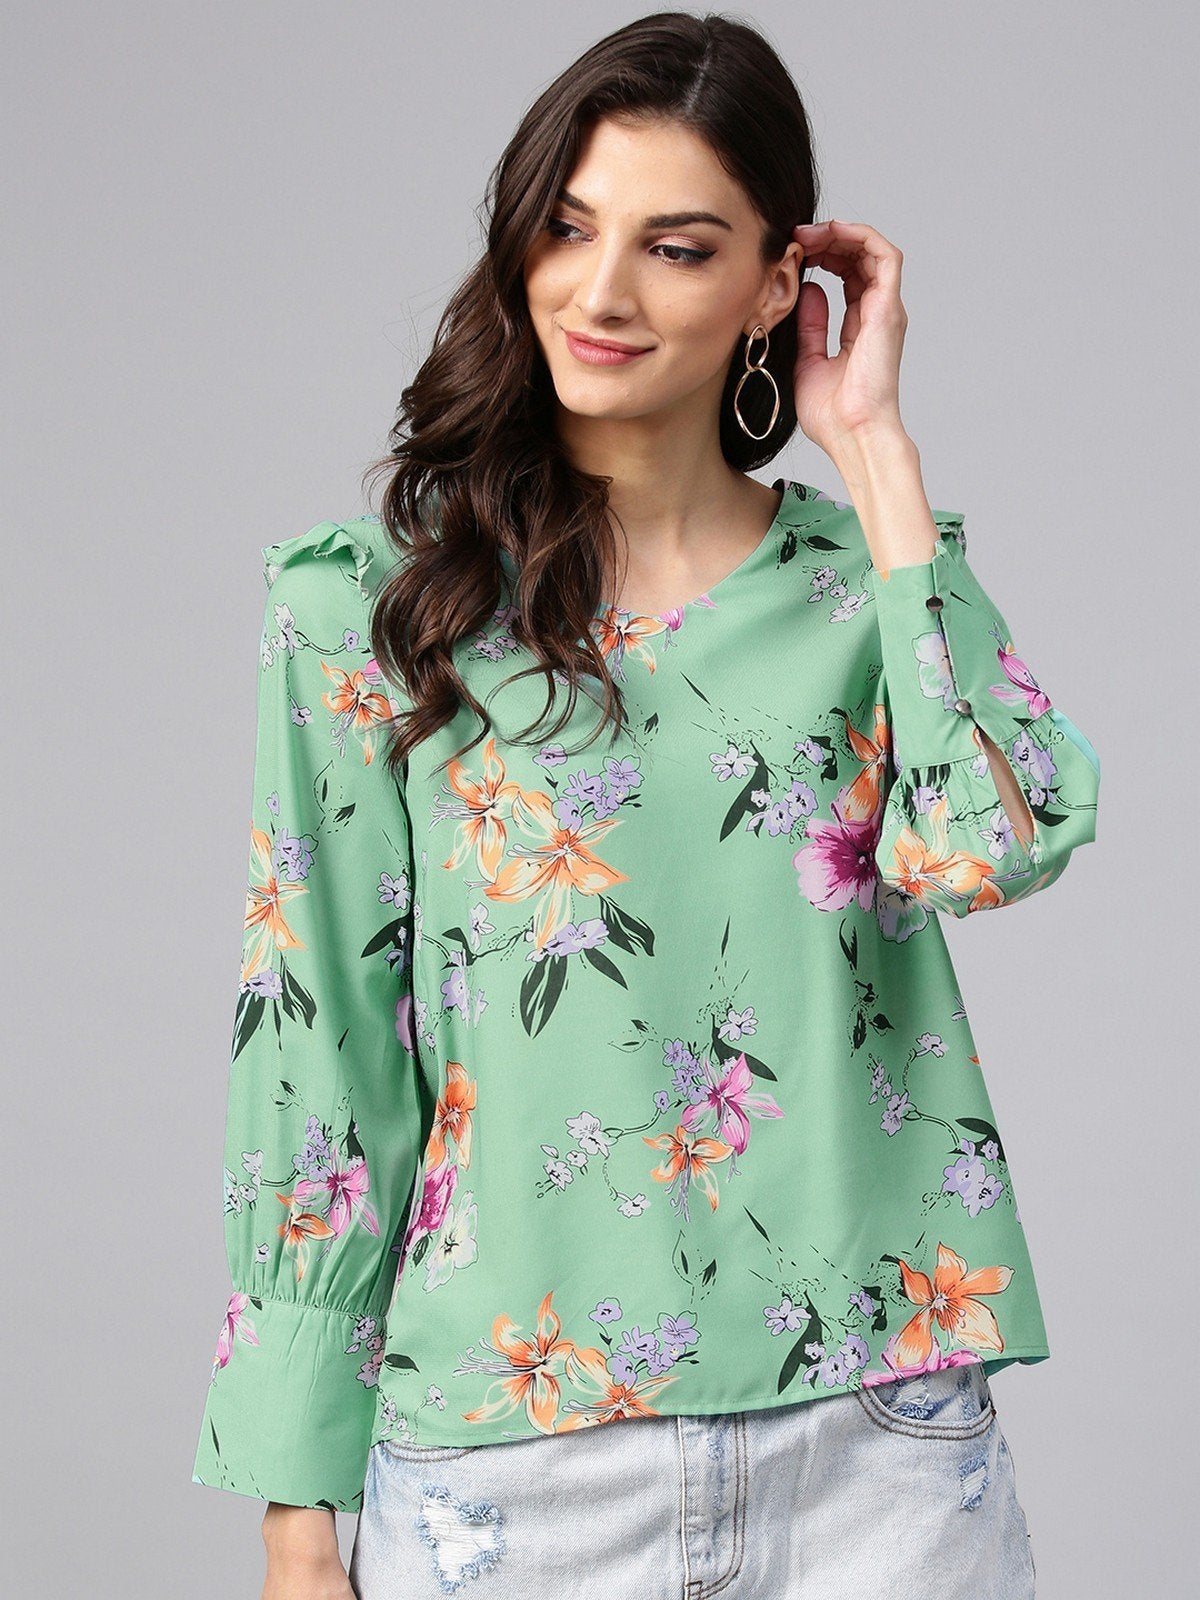 Women's Green Floral Print Top With Shoulder Ruffles - Pannkh